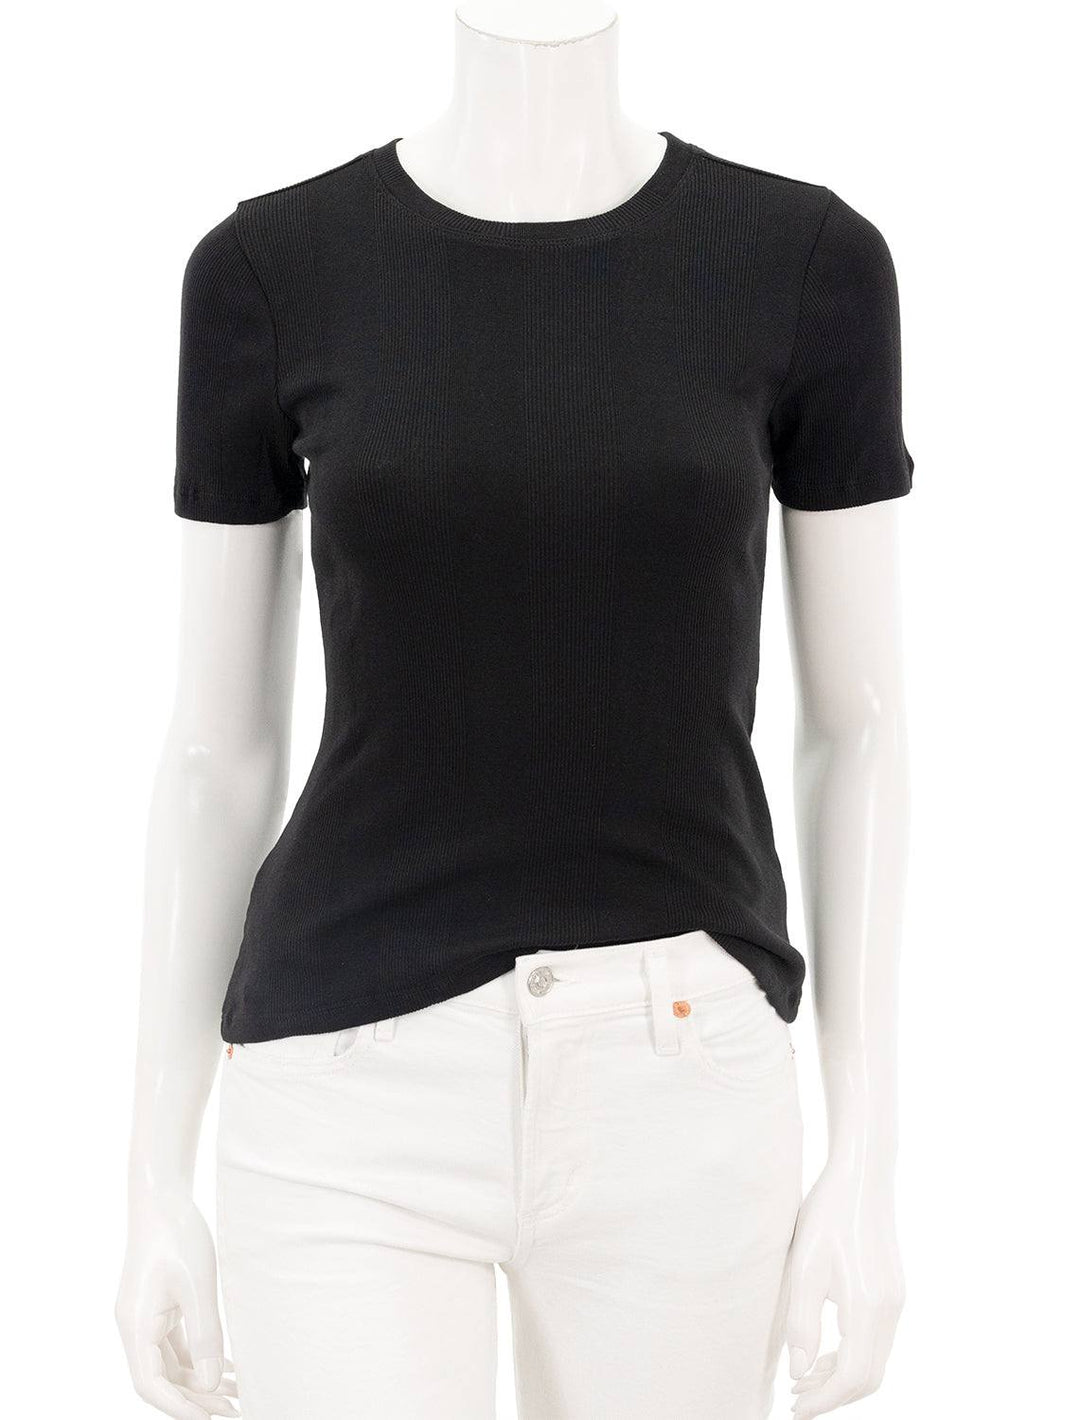 Front view of Goldie Lewinter's cotton rib tee in black.